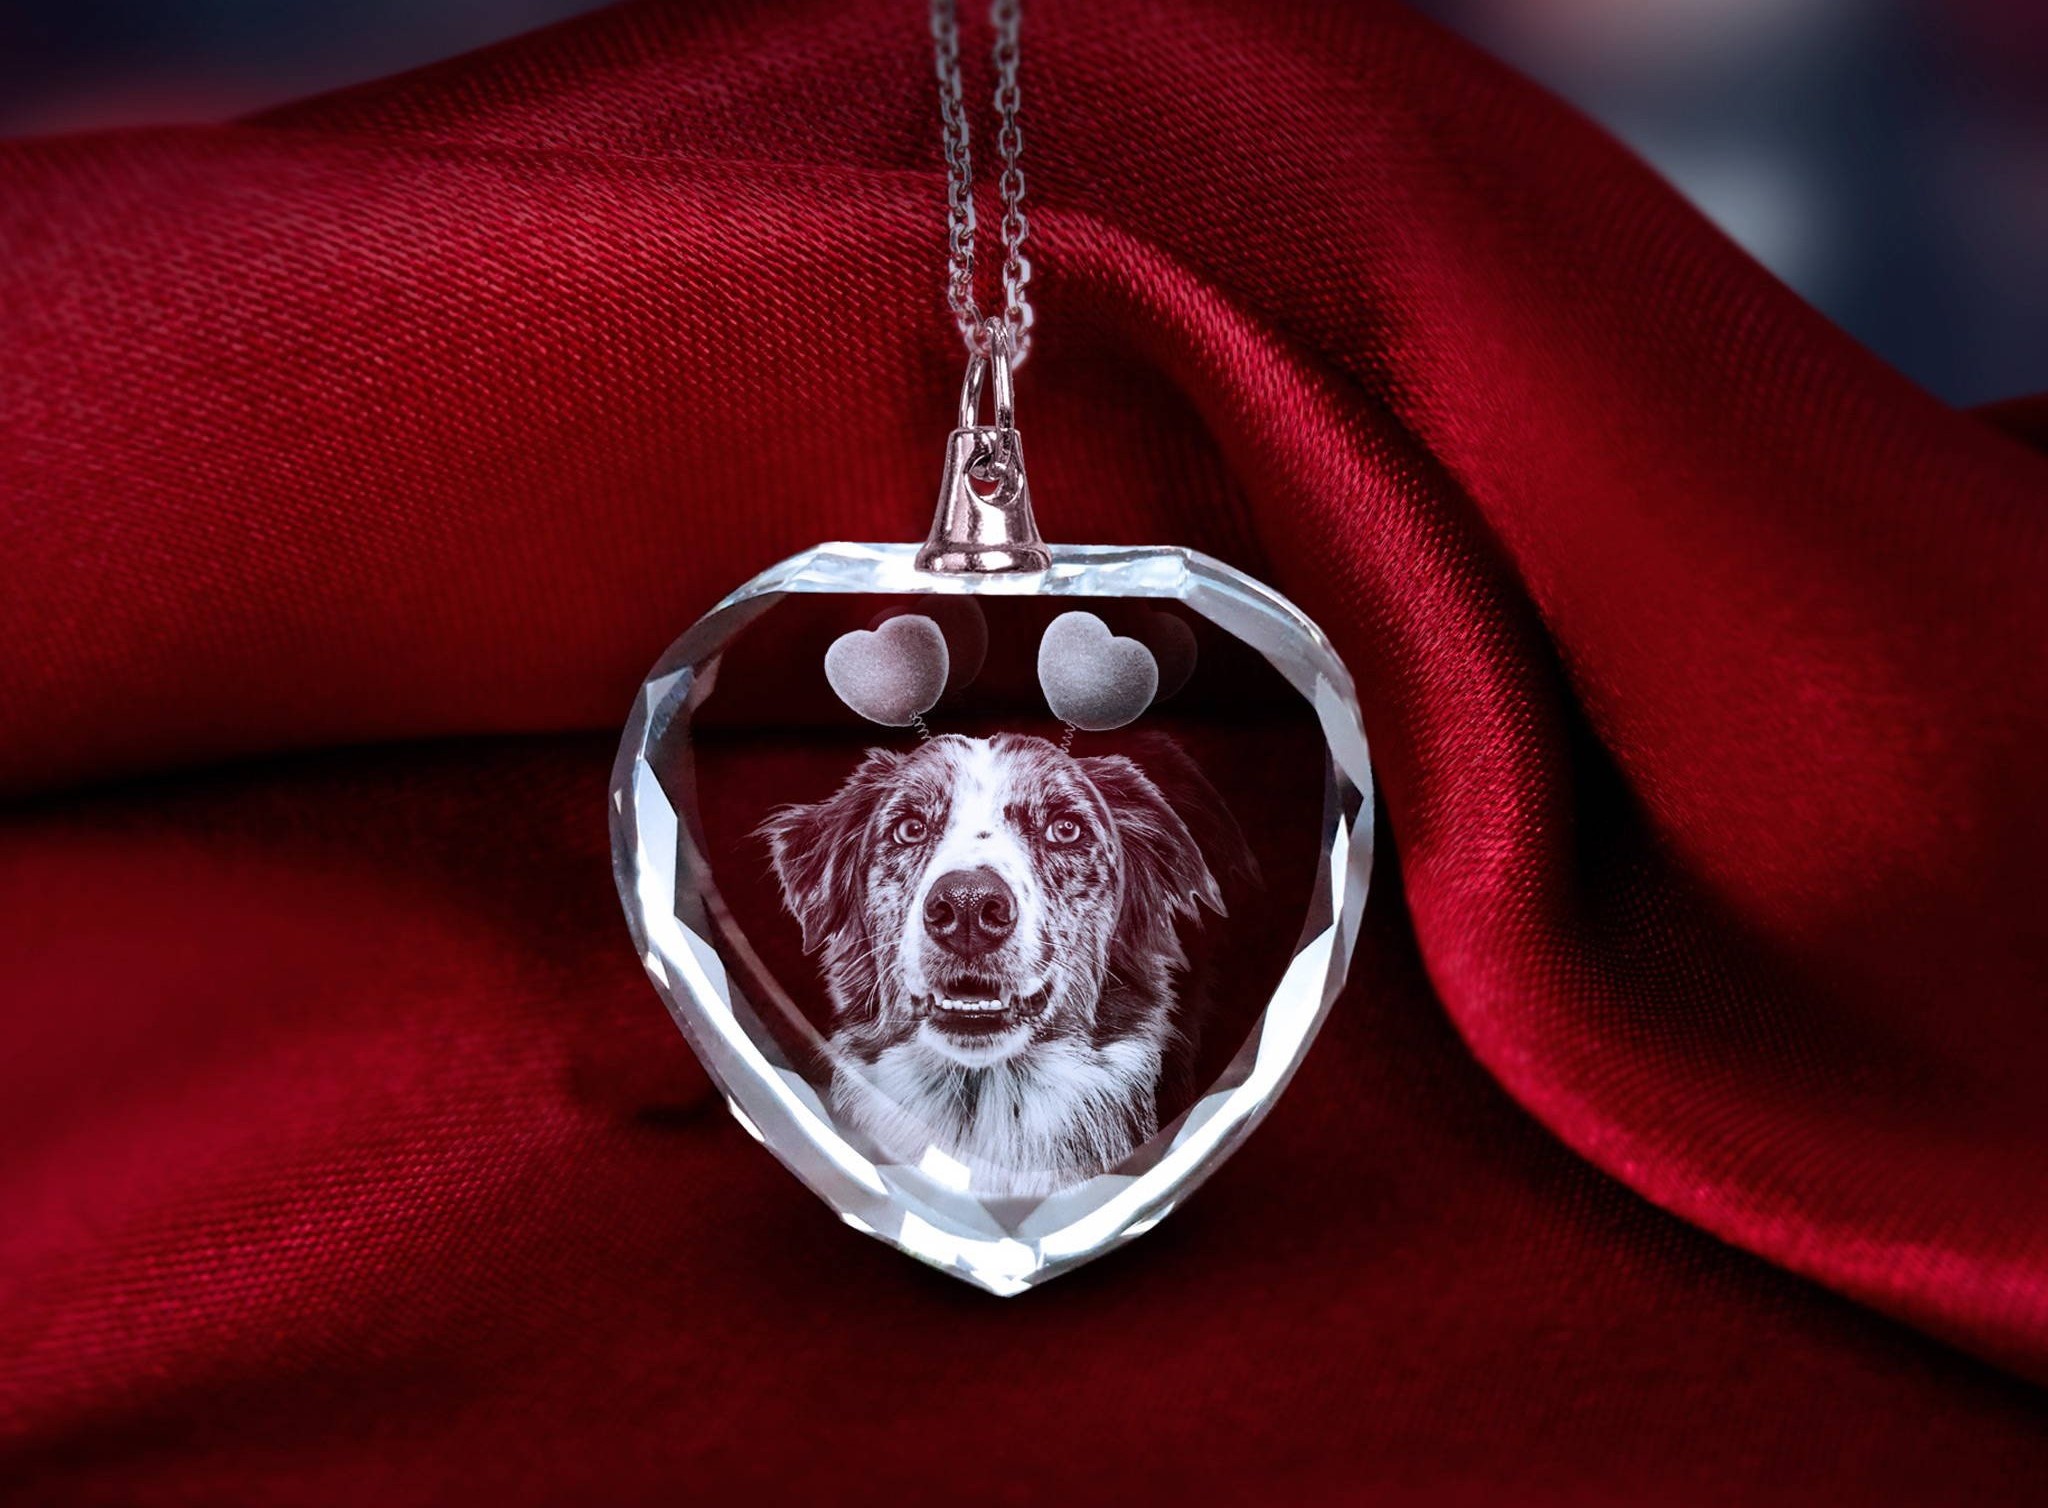 An adorable picture of a dog engraved inside a heart-shaped necklace for Valentine’s Day.